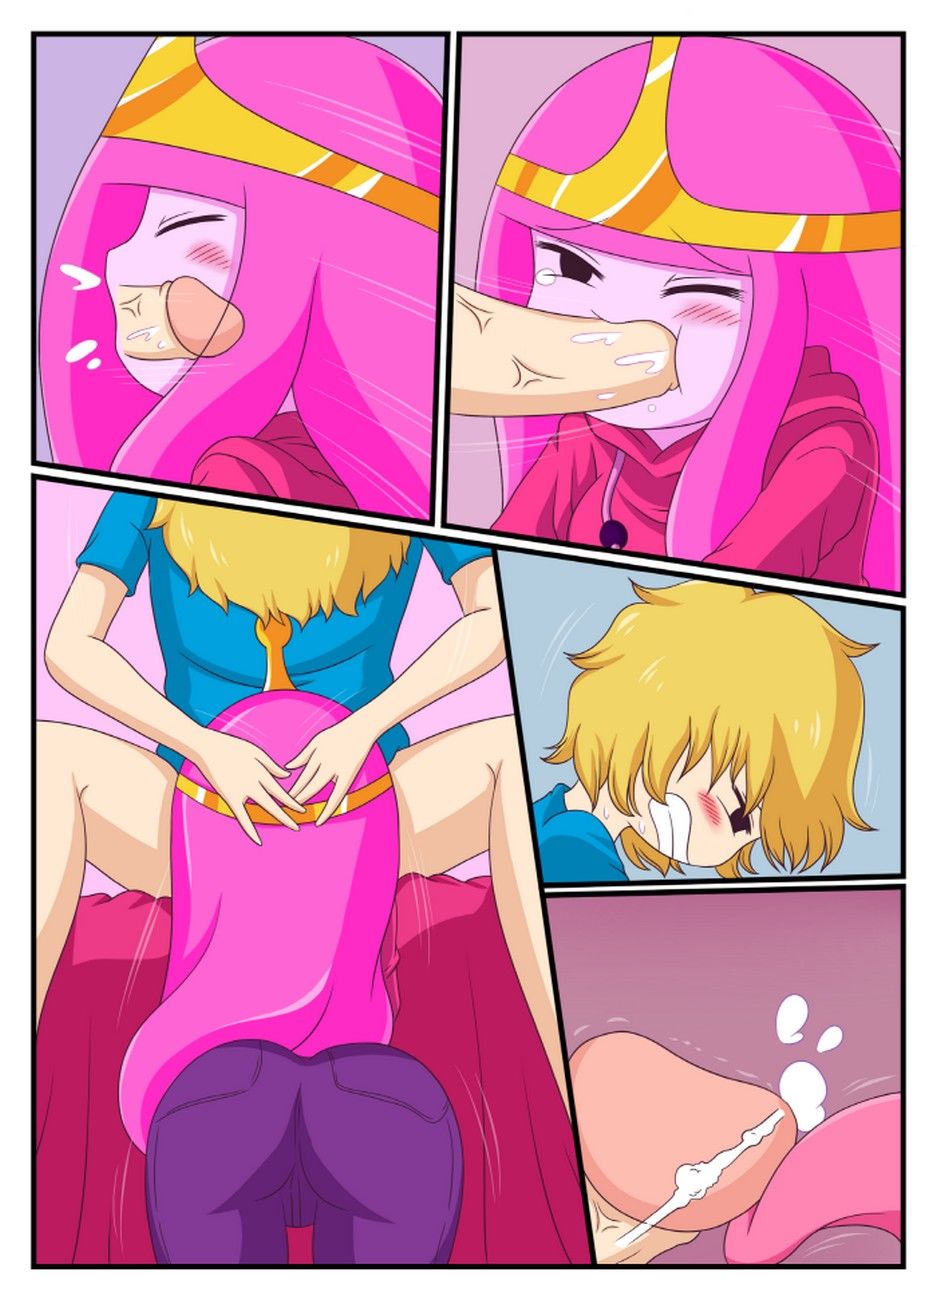 Adventure_Time_-_Adult_Time_1 comix_43420.jpg